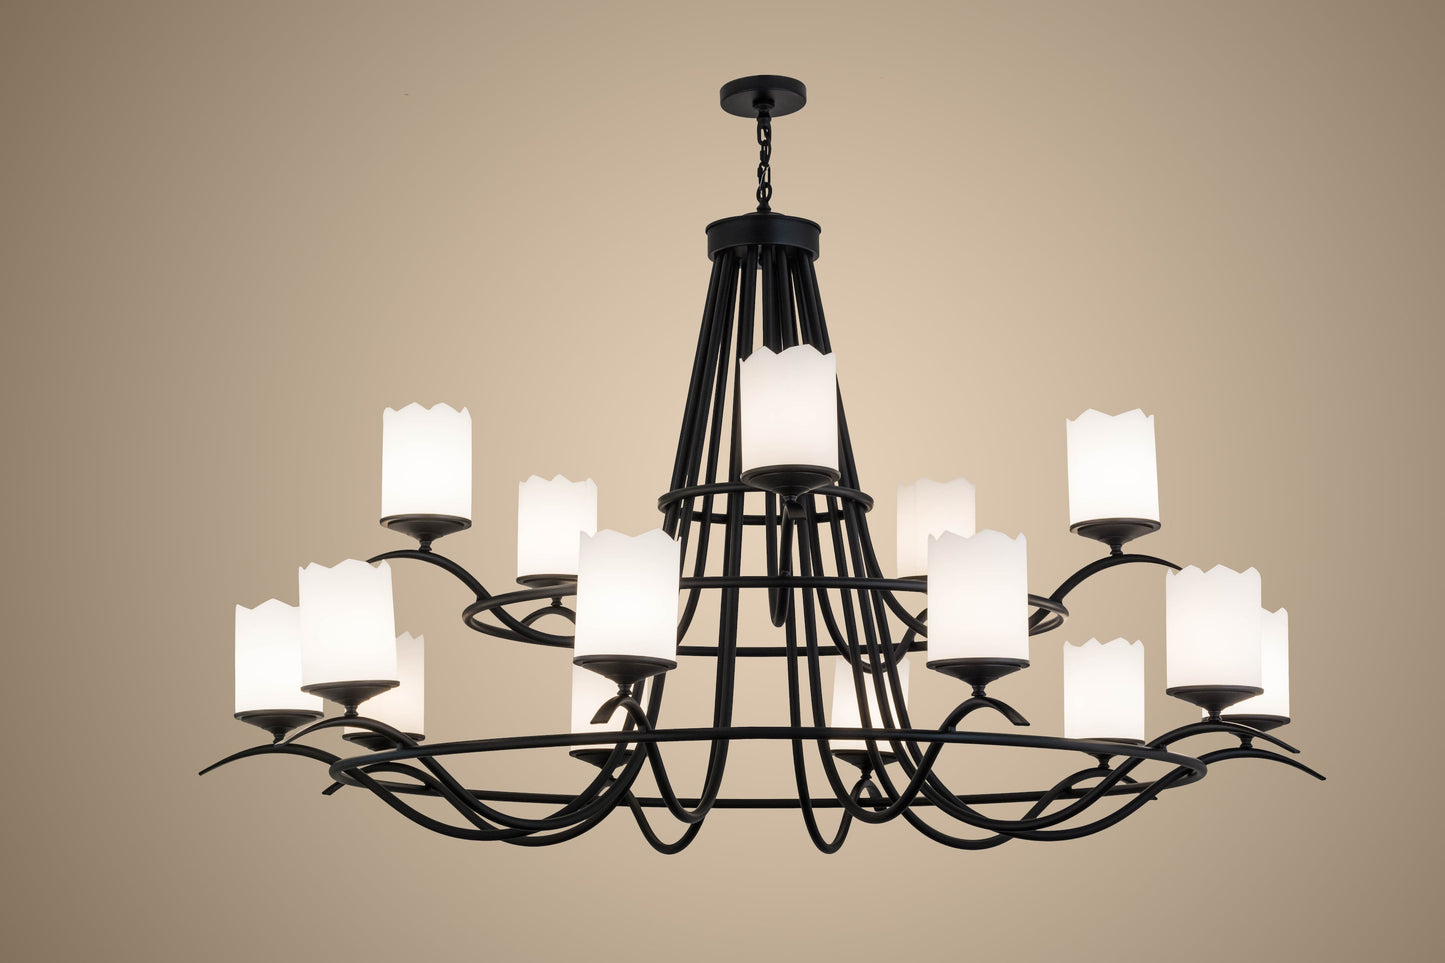 78" Octavia 15-Light Two Tier Chandelier by 2nd Ave Lighting